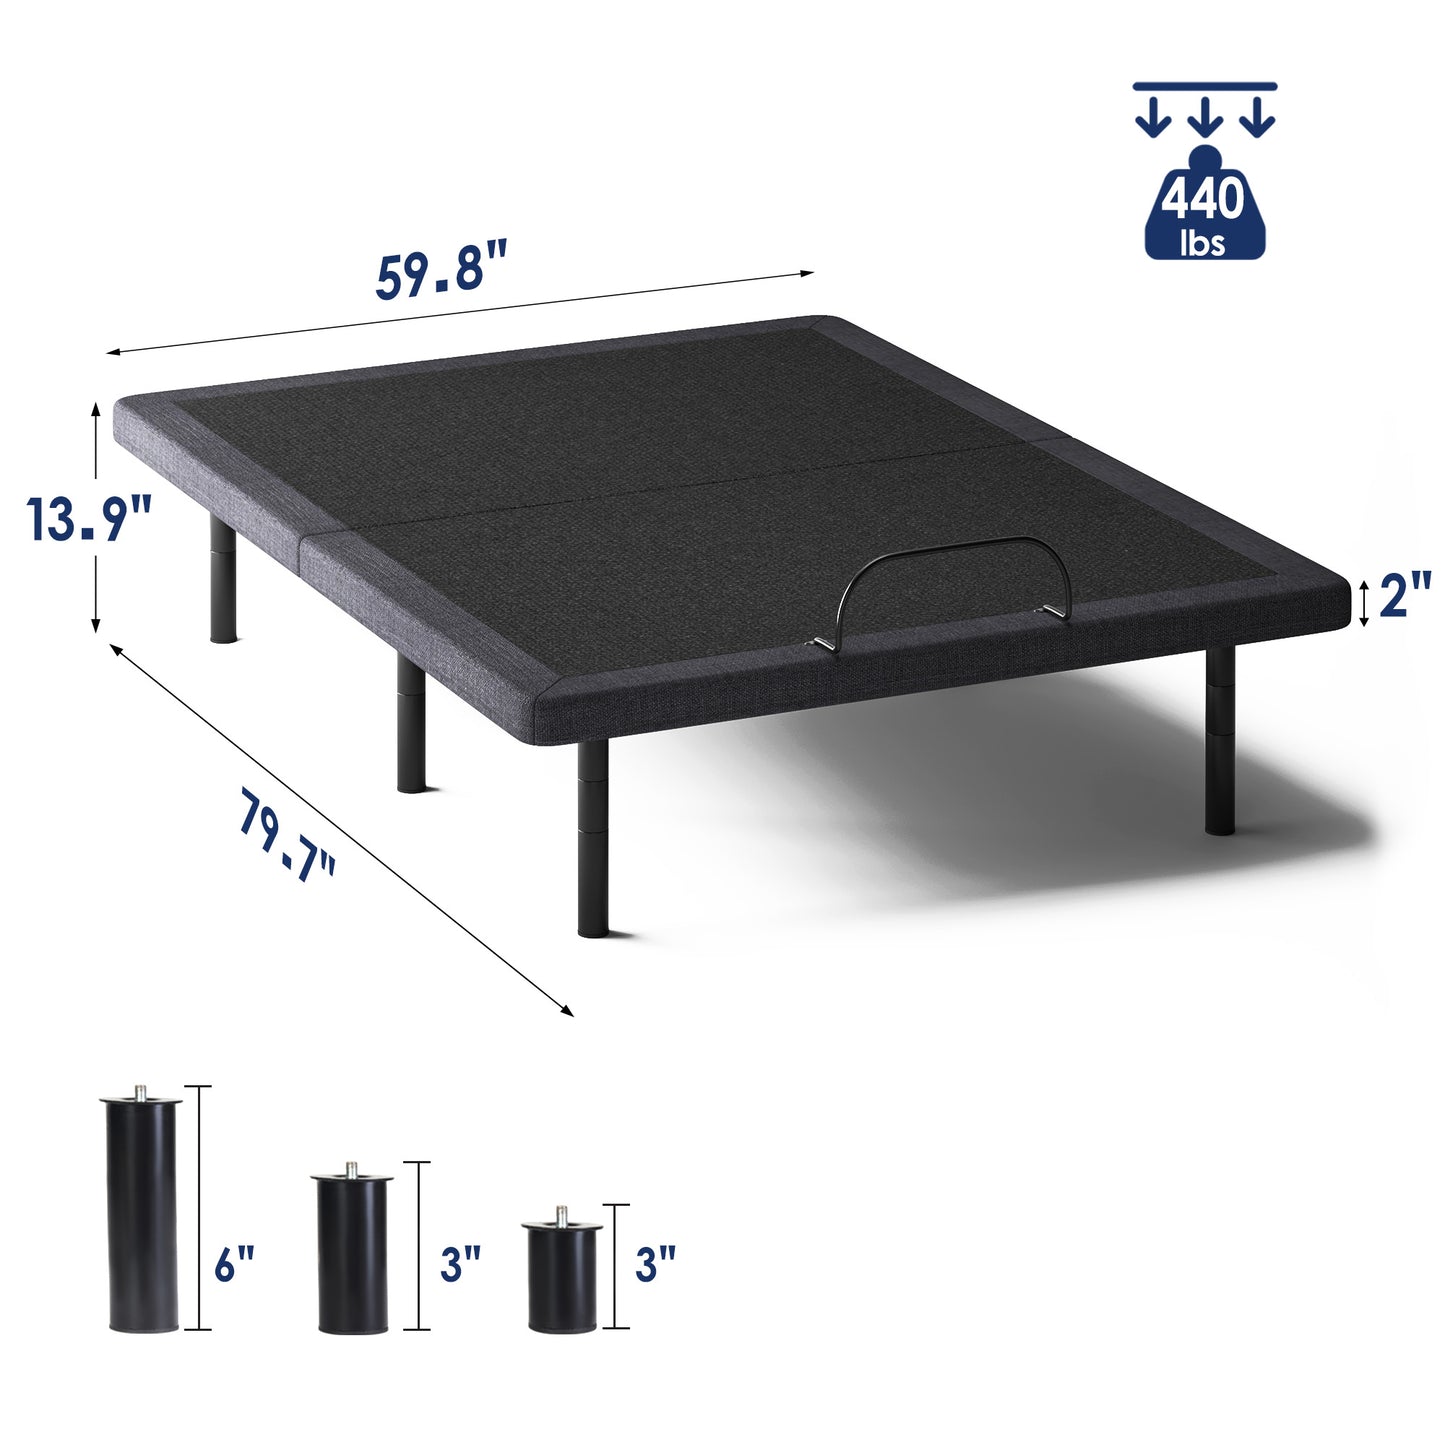 SogesPower Queen Size Adjustable Bed Base: Massage,USB Ports, Nightlight & More